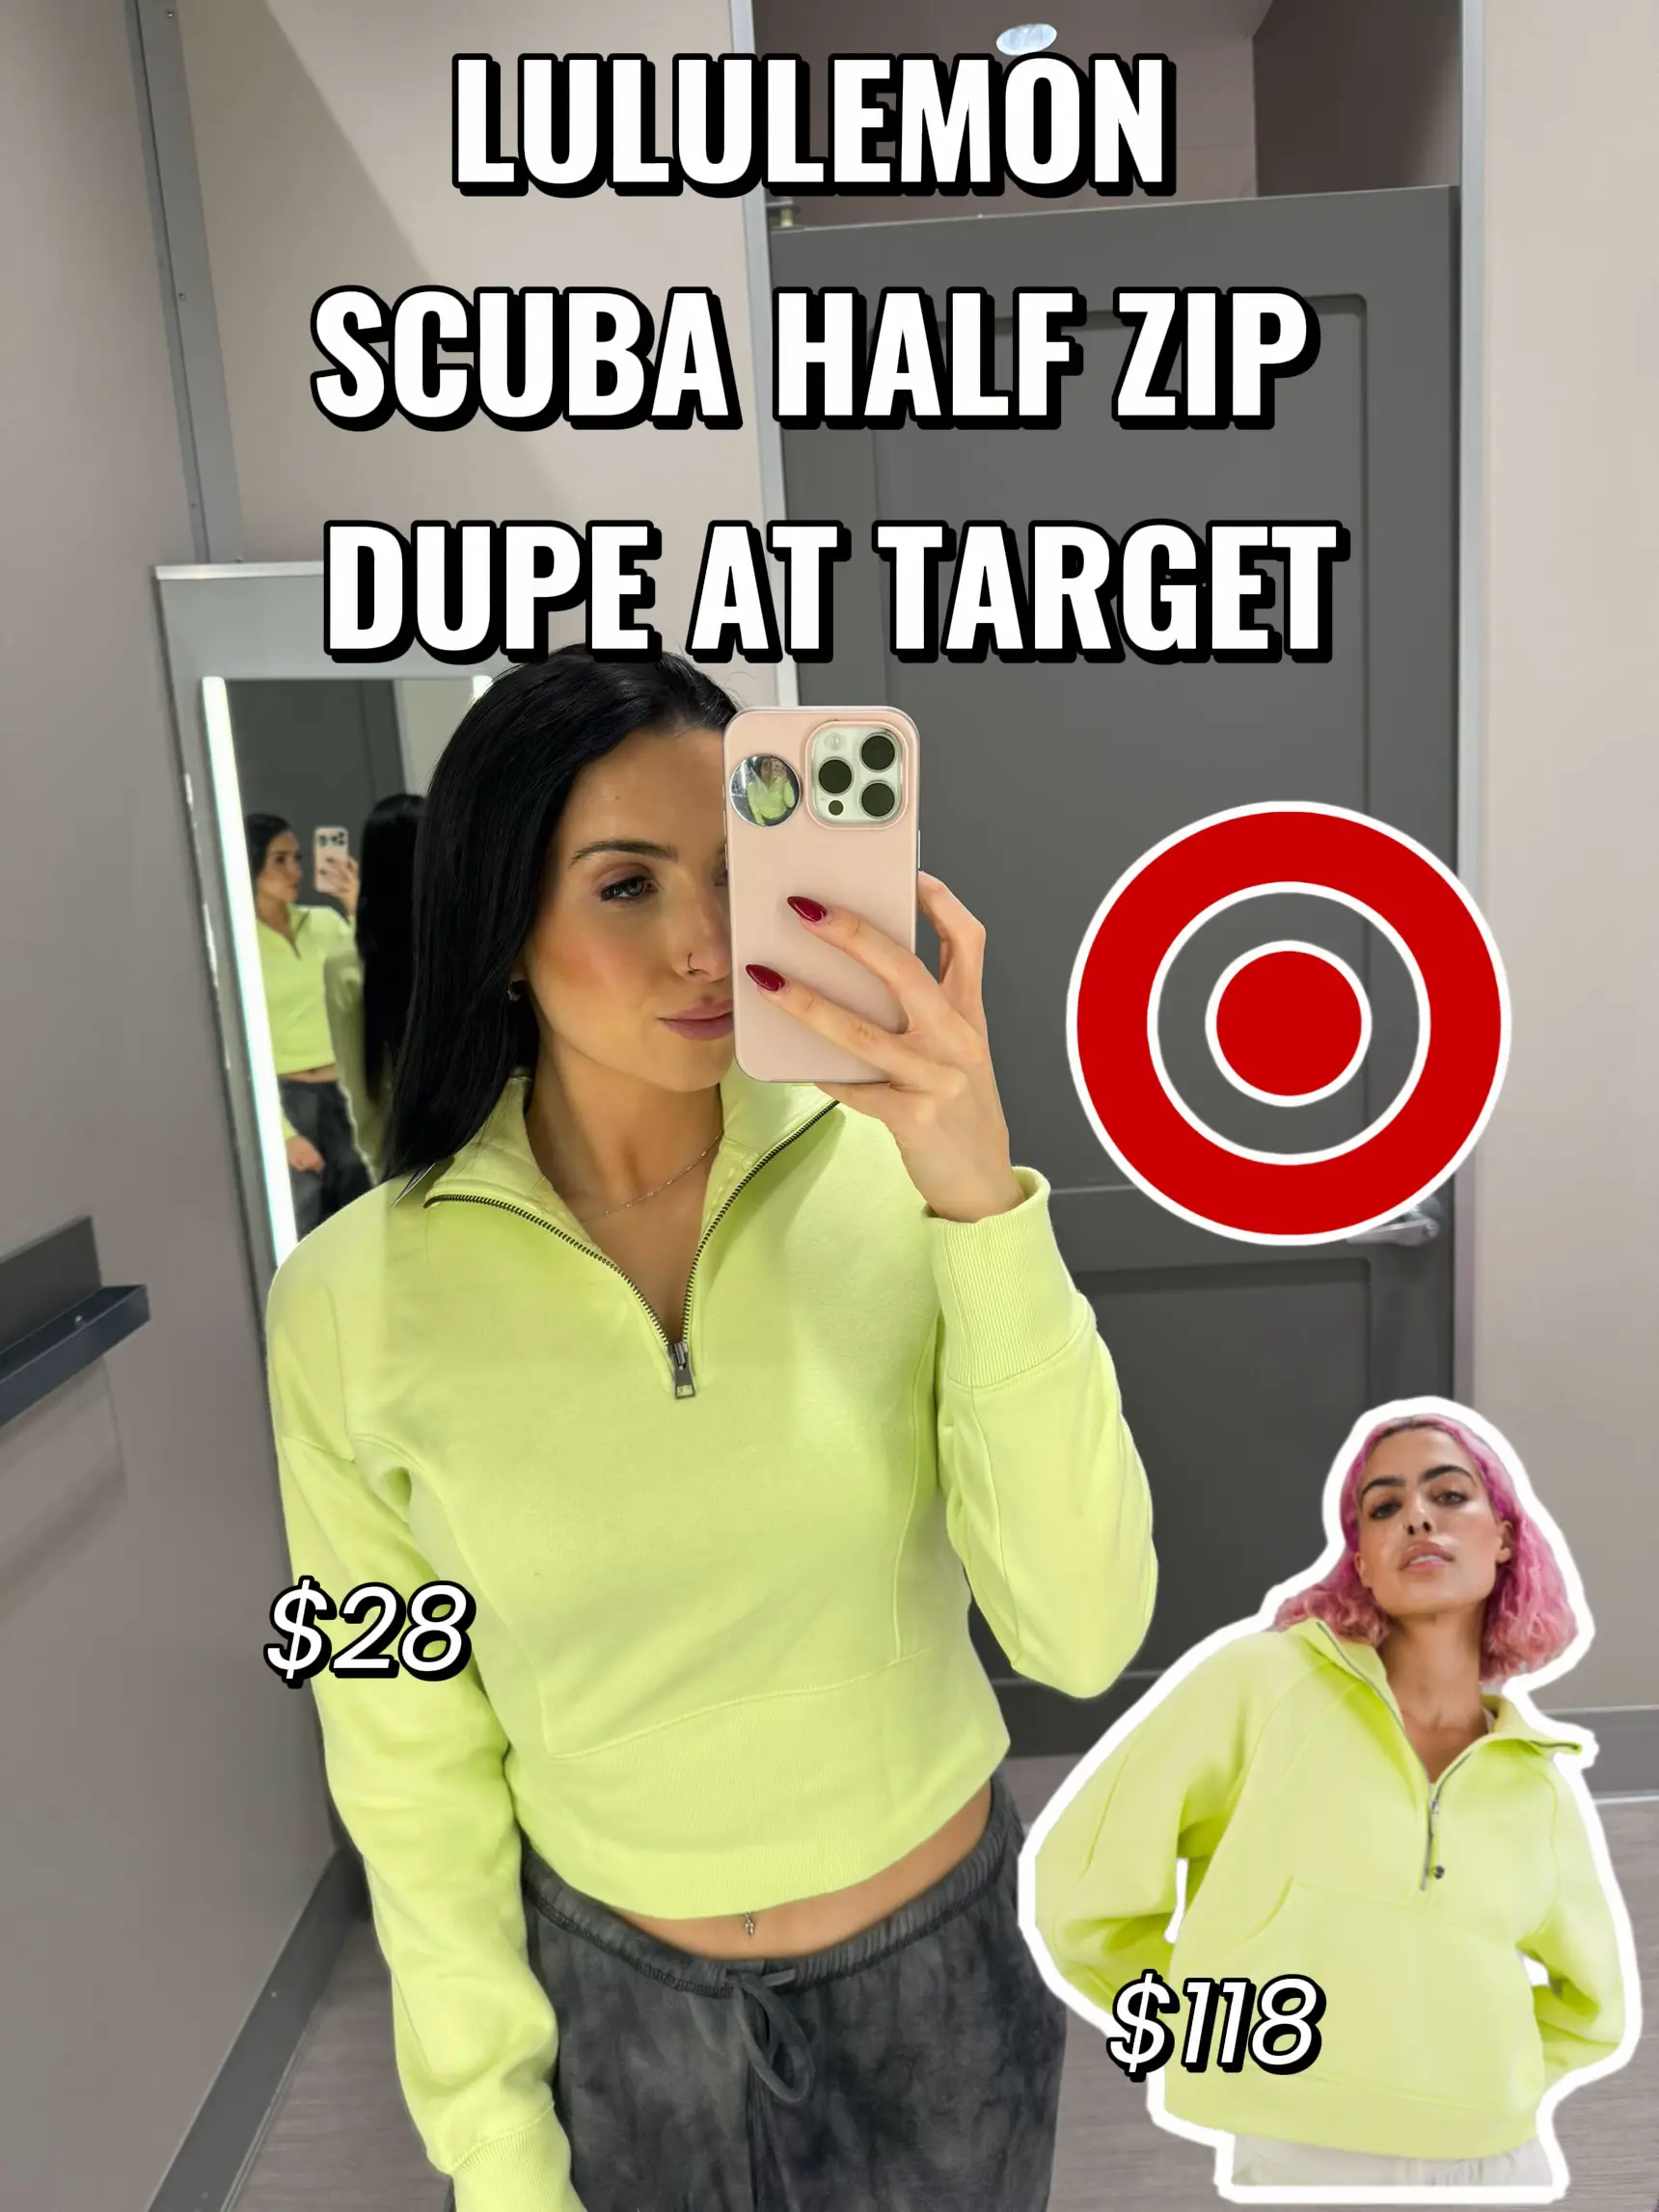 lululemon scuba for less, Gallery posted by HappeningsofK